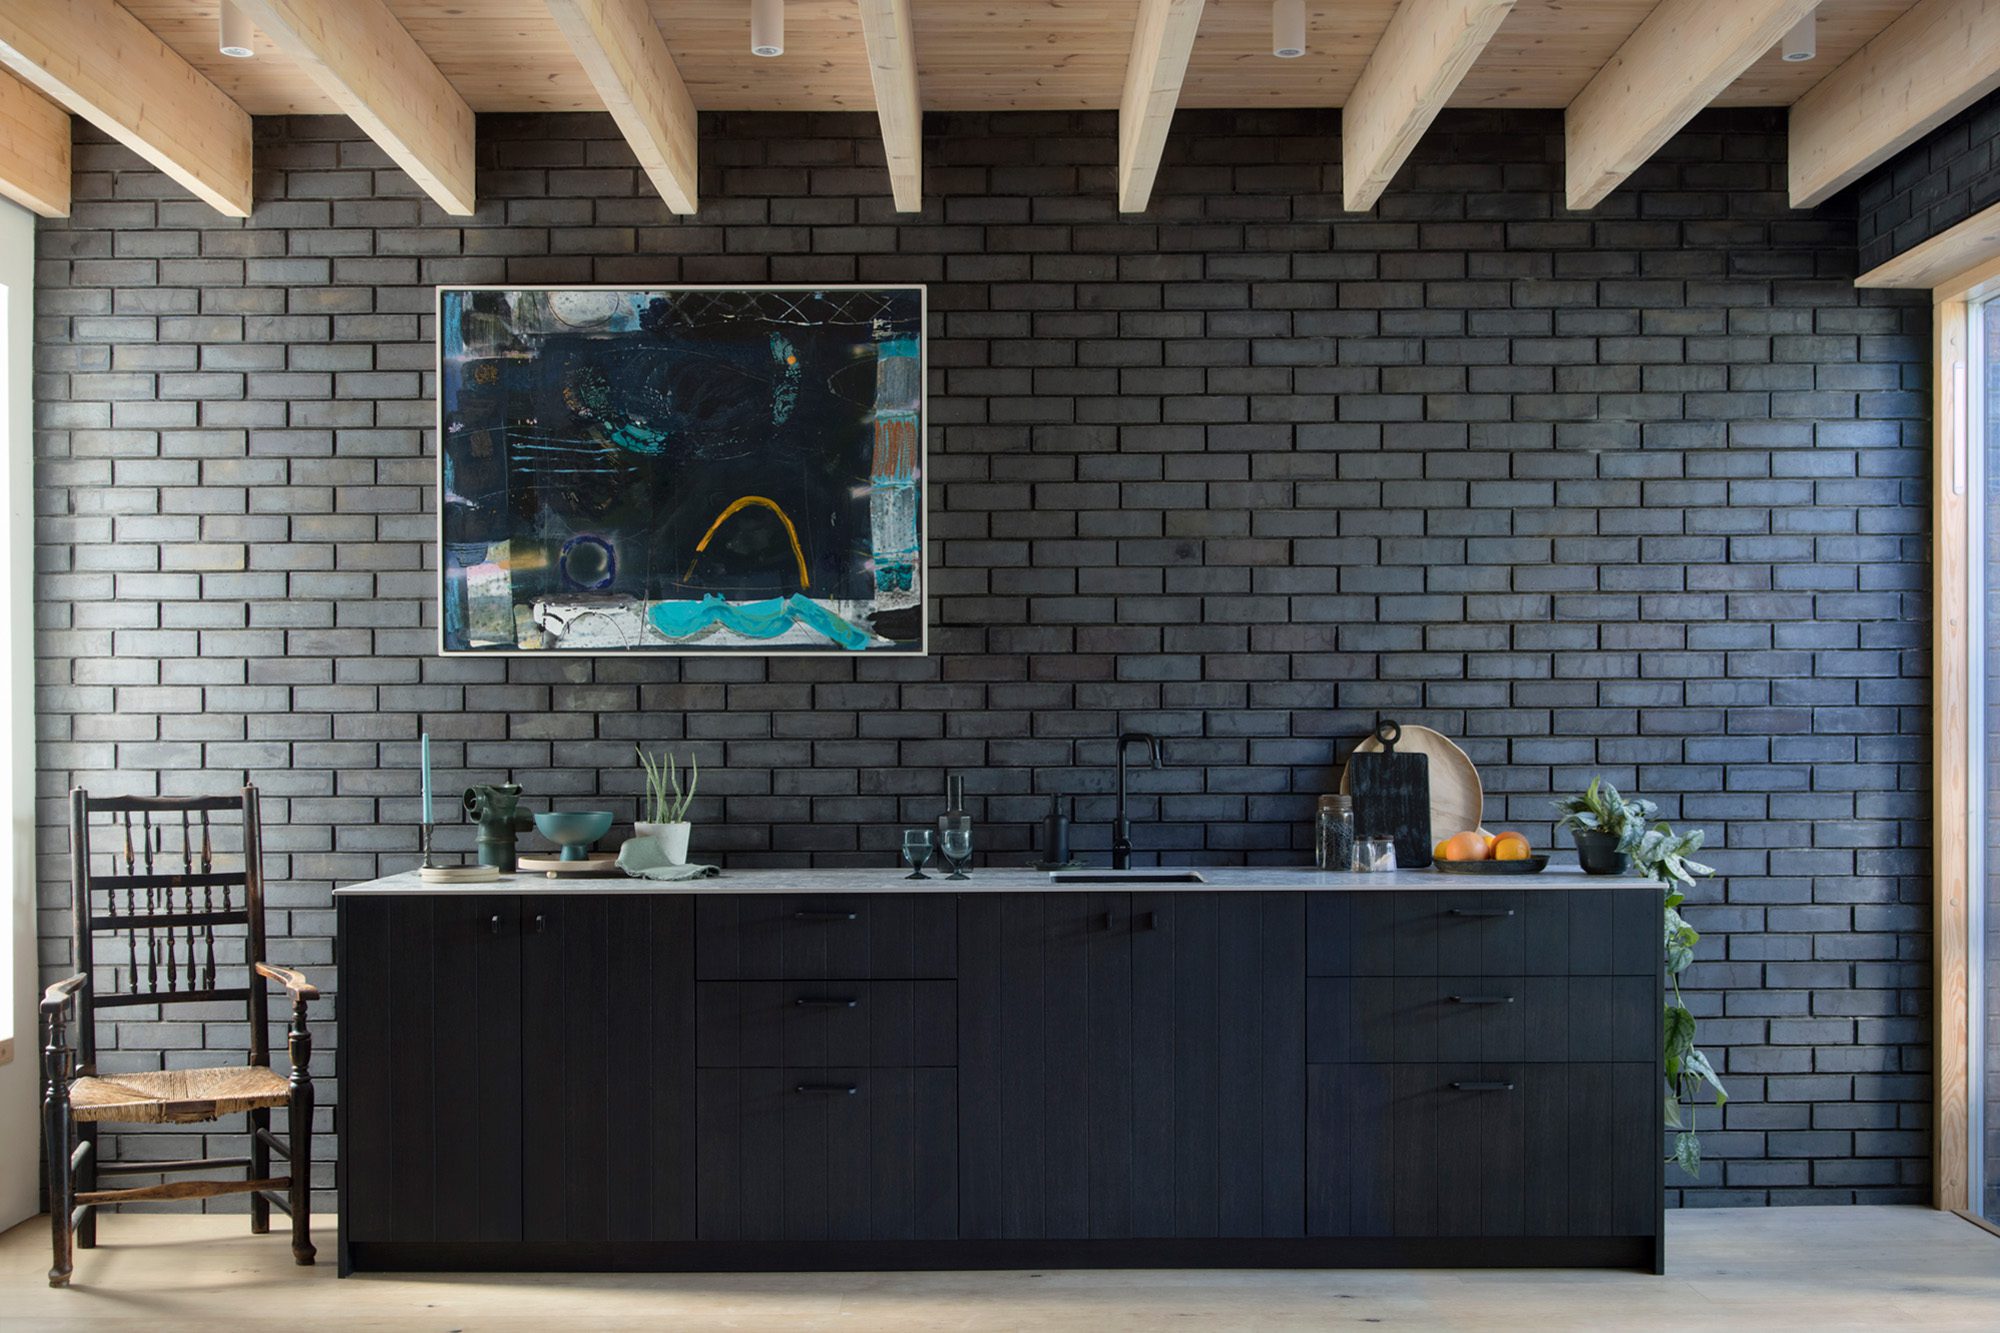 Husk's Smoked Oak Kitchen, featuring Smoked Oak V-Groove kitchen fronts.